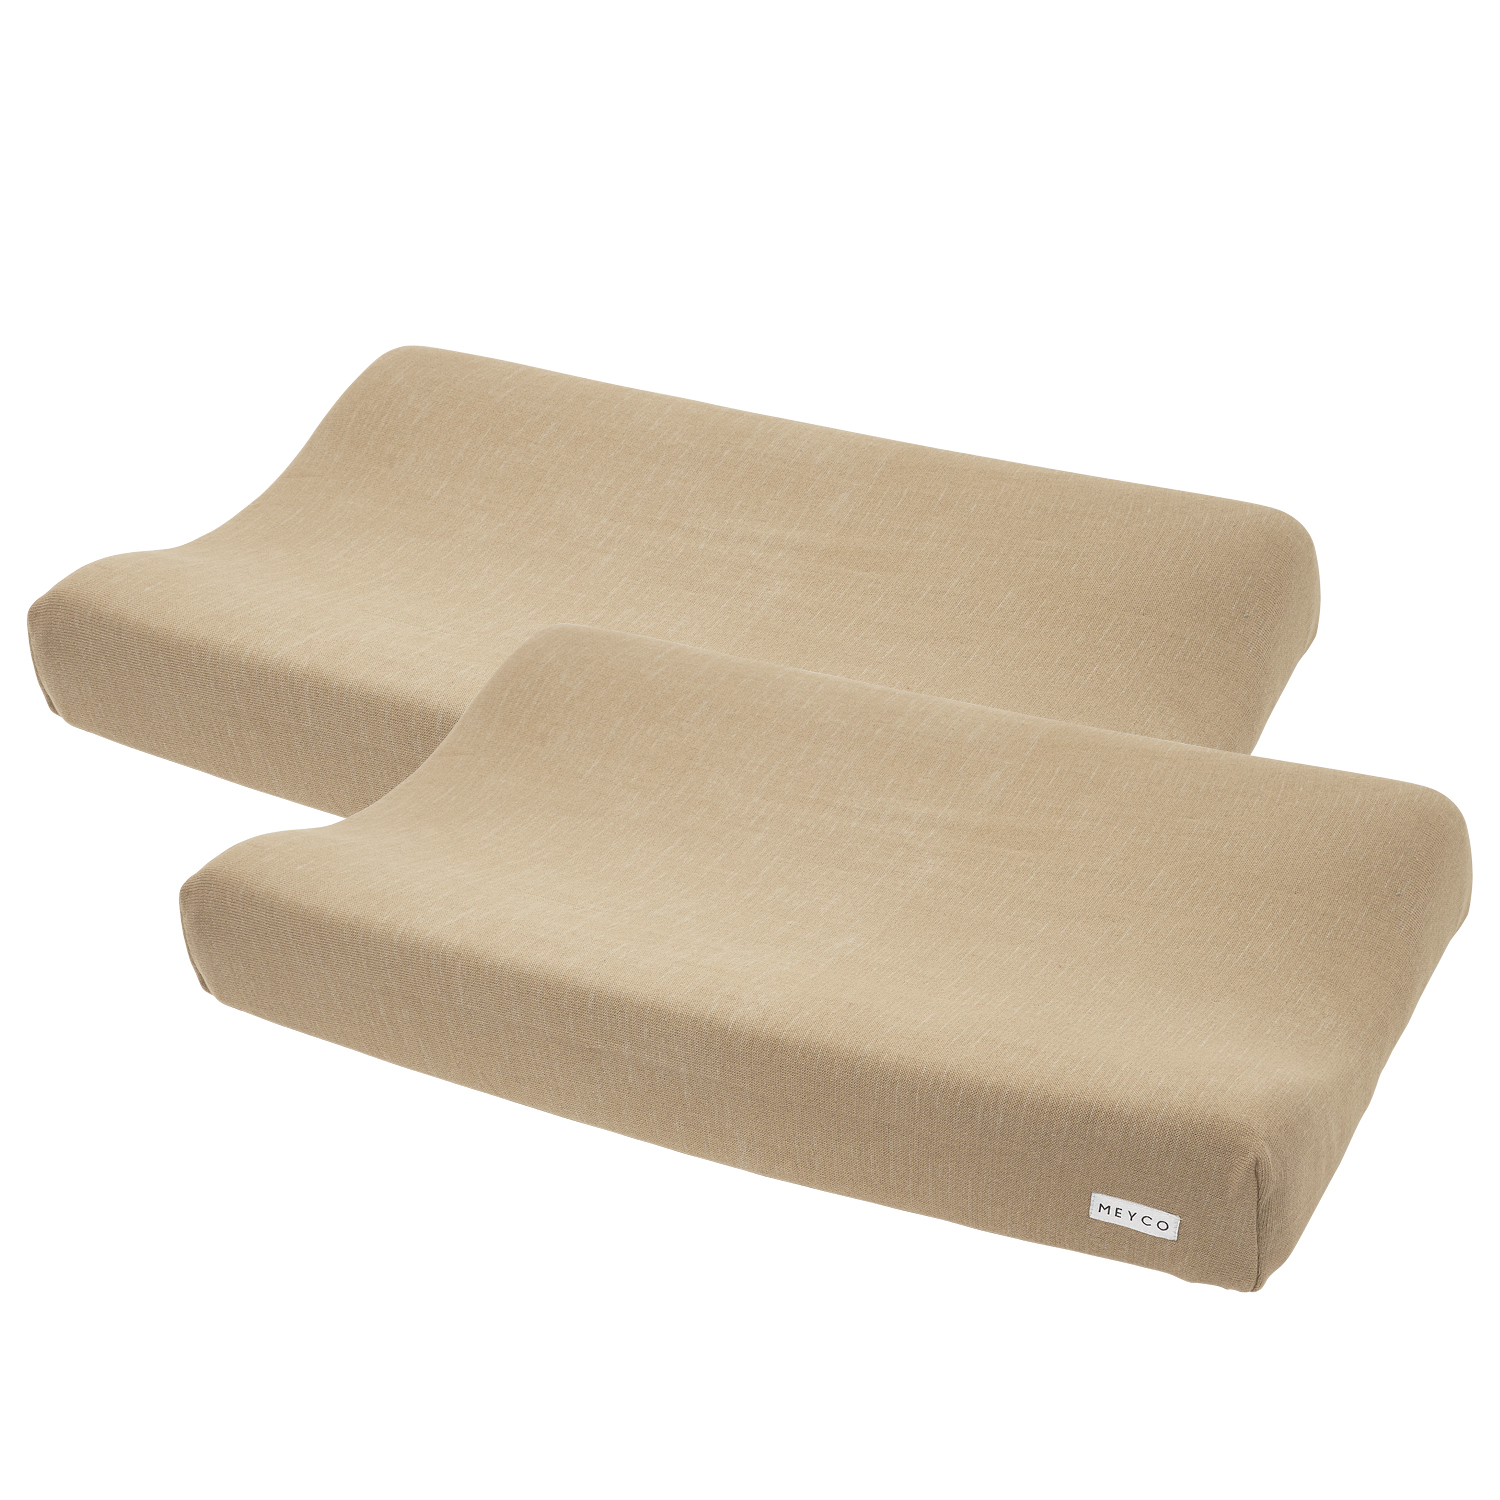 Aankleedkussenhoes 2-pack Knit Basic - taupe - 50x70cm